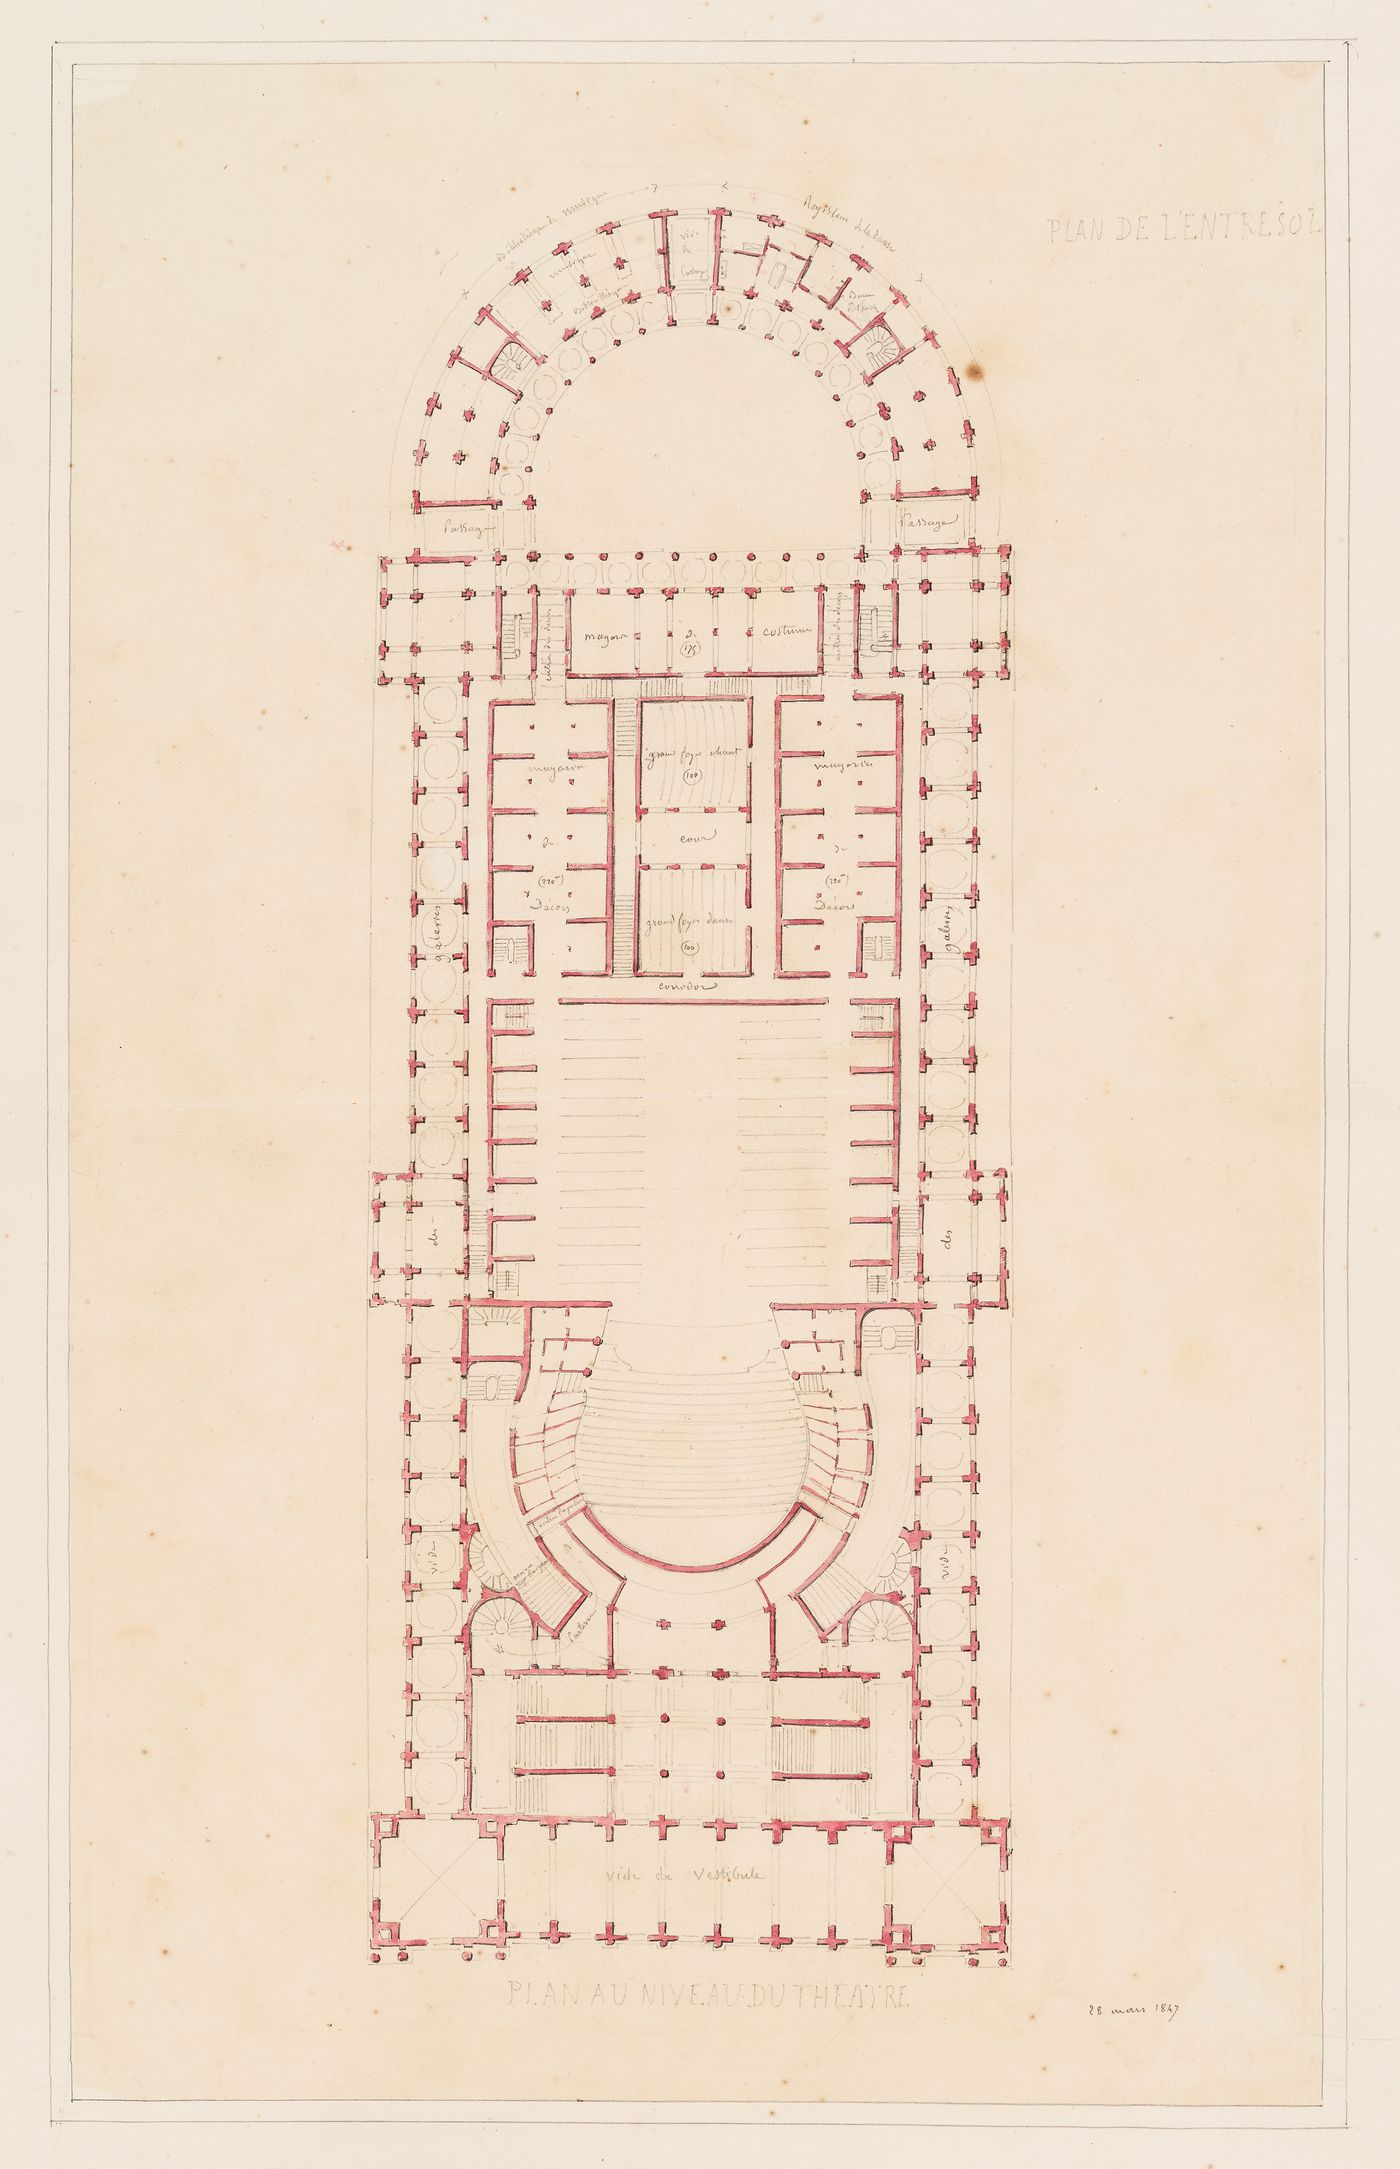 Plan for the "entresol" for an opera house for the Académie royale de musique